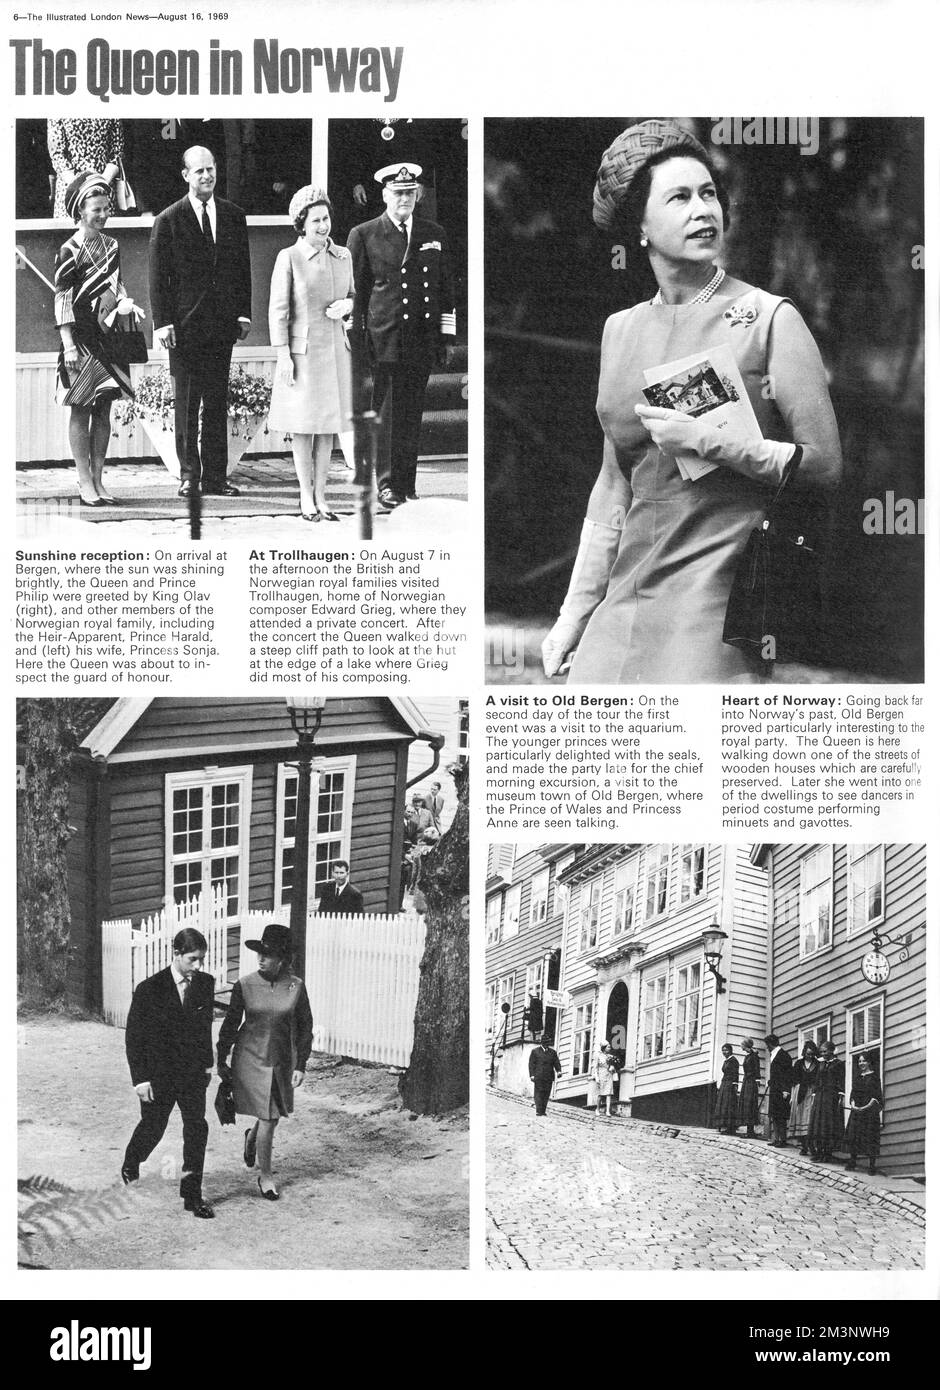 Photographs documenting the unofficial visit of Queen Elizabeth II and her family to Norway in August 1969. Clockwise from top left: 1. On arrival in Bergen, the Queen and Prince Philip were greeted by King Olav and other members of the Norwegian royal family. 2. The British and Norwegian royal families visited Trollhaugen and the afterwards the Queen walked down a steep cliff to look at the hut at the edge of the lake where Greig did much of his composing. 3. Prince Charles and Princess Anne are seen talking as they take a walk in Old Bergen. 4. The Queen walking down a street in Old Bergen. Stock Photo